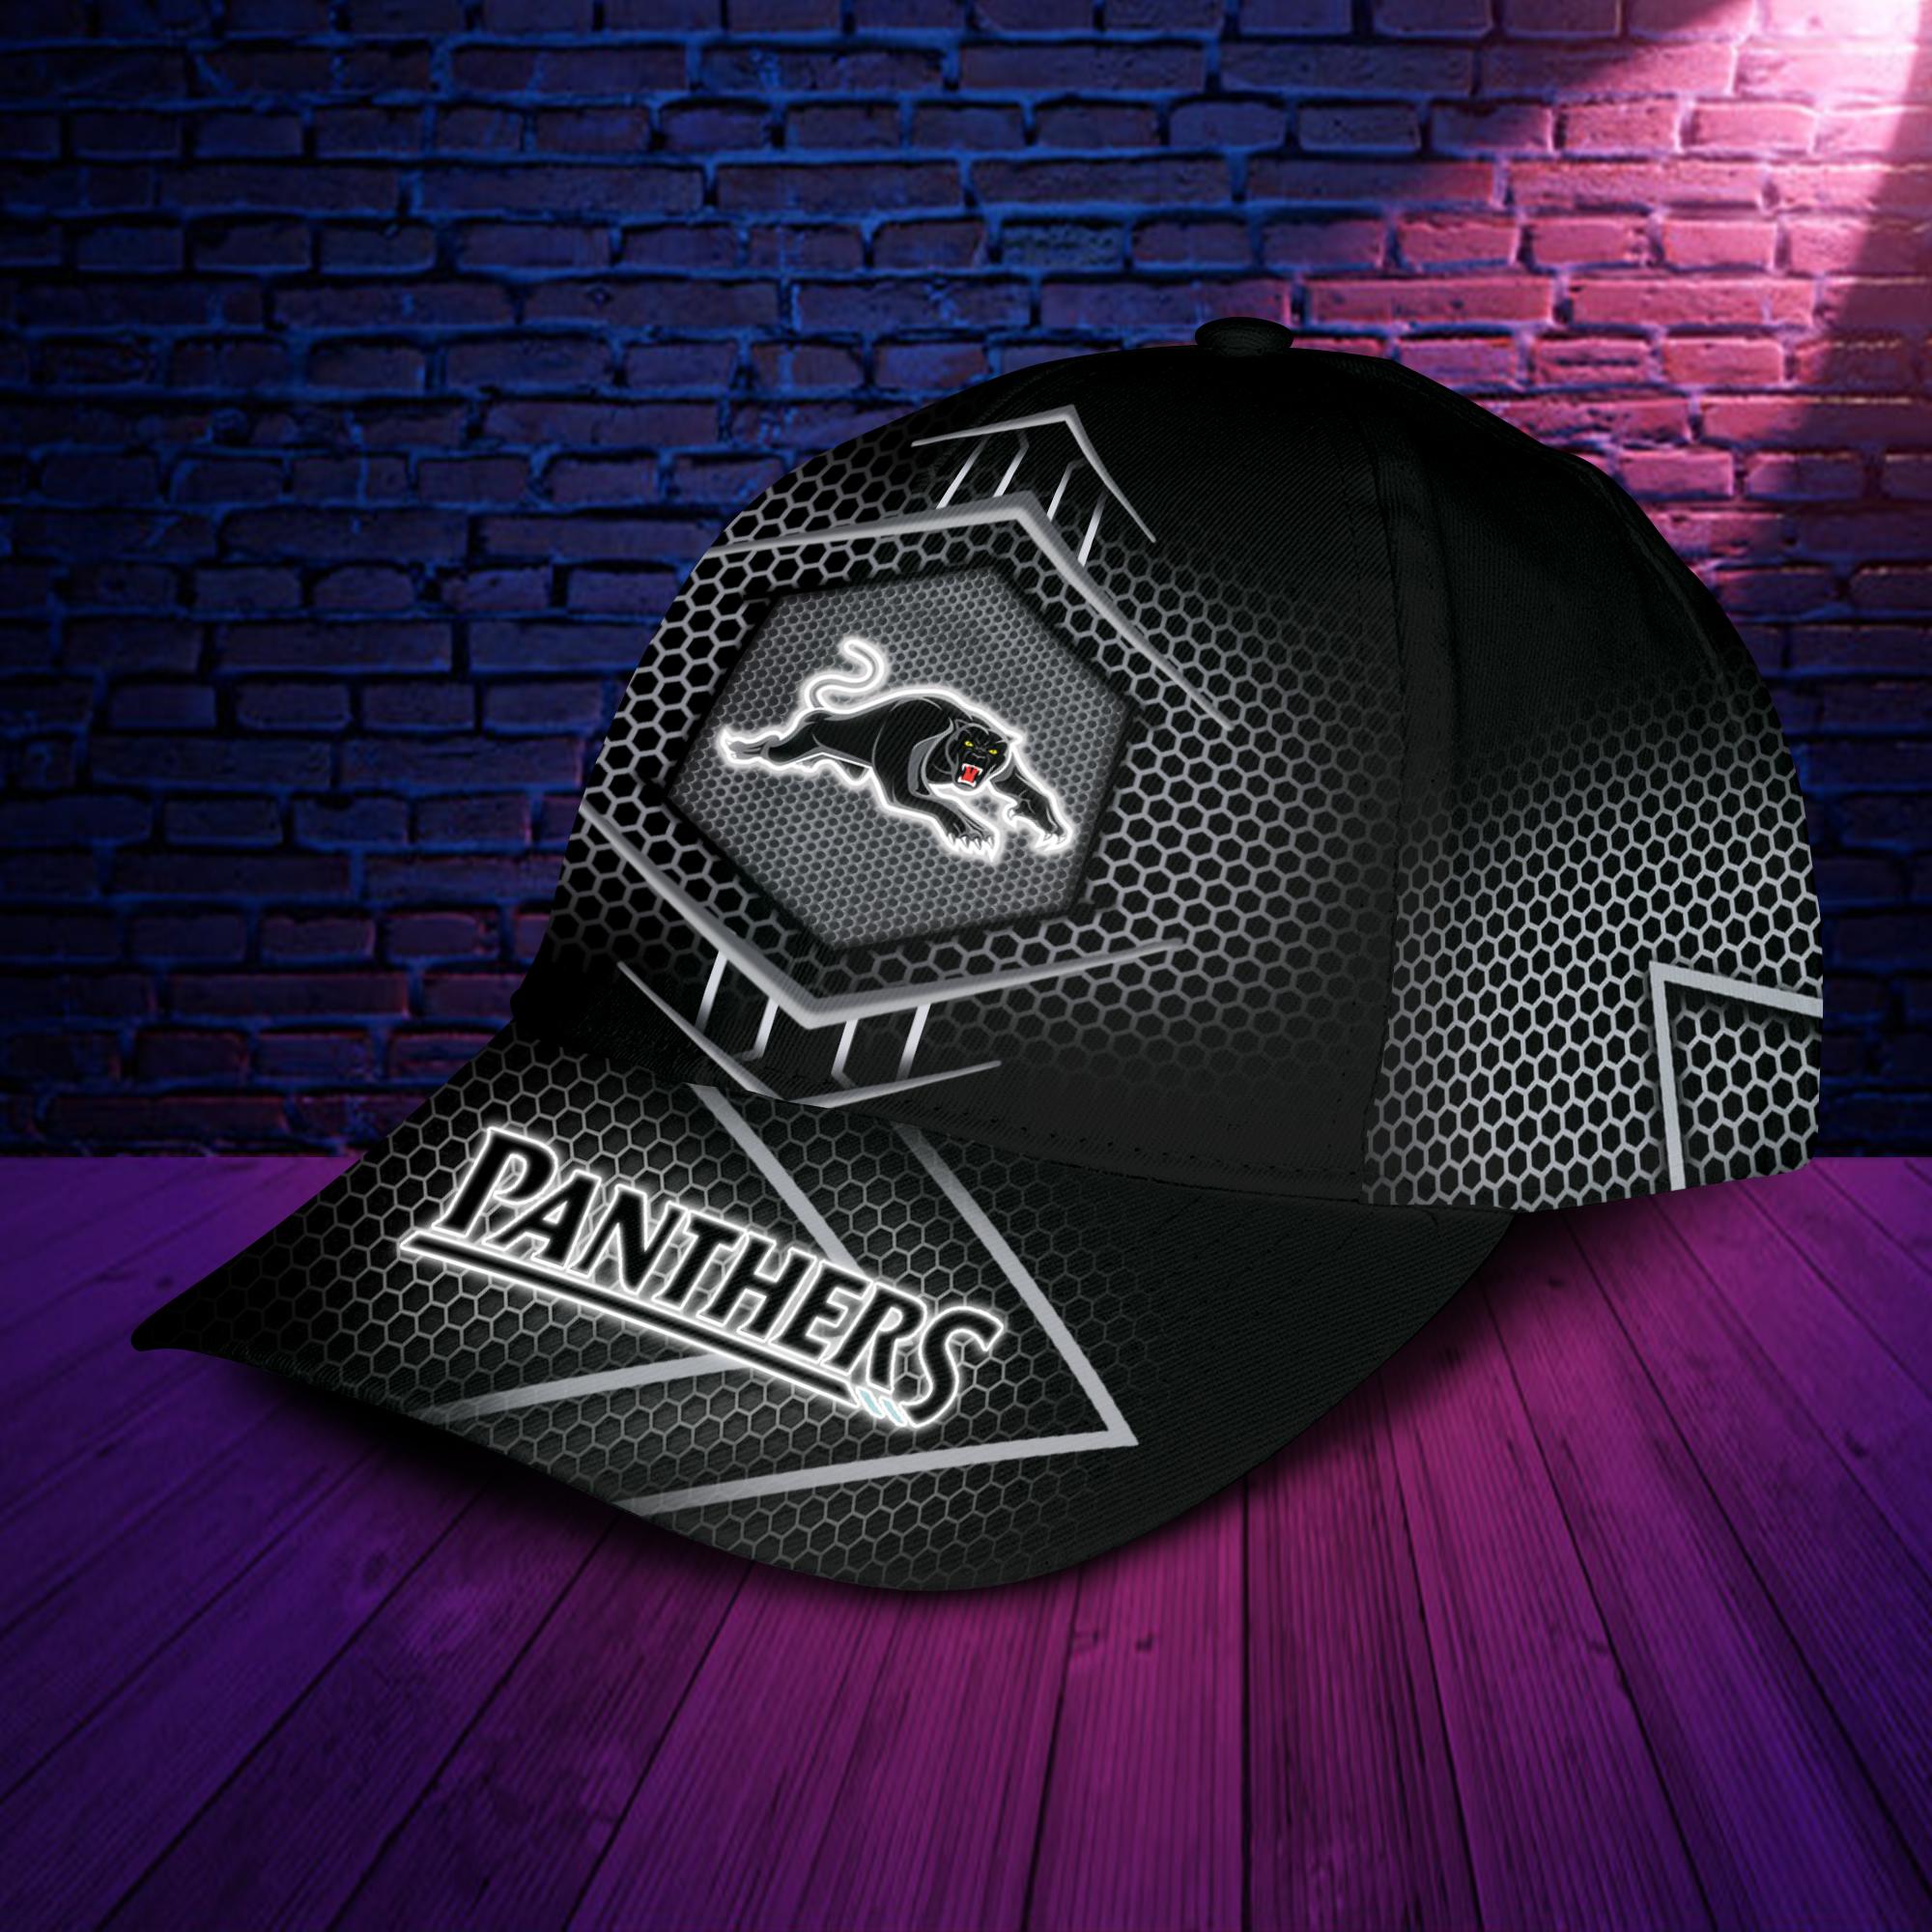 Penrith Panthers NRL Classic Cap